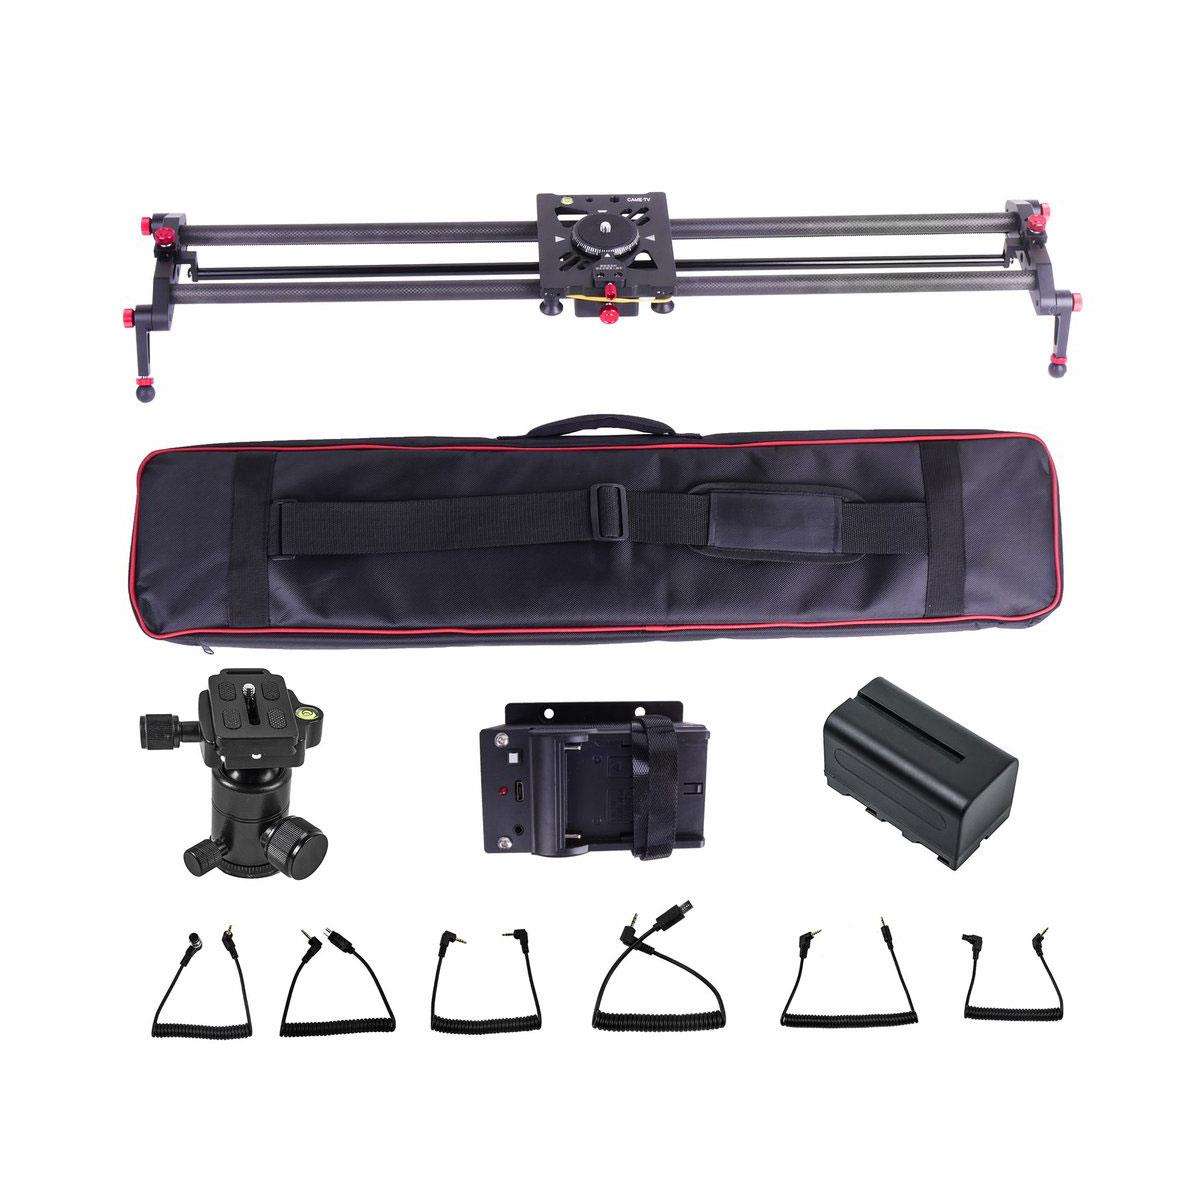 Image of Came-TV 120cm Motorized Parallax Slider with Bluetooth